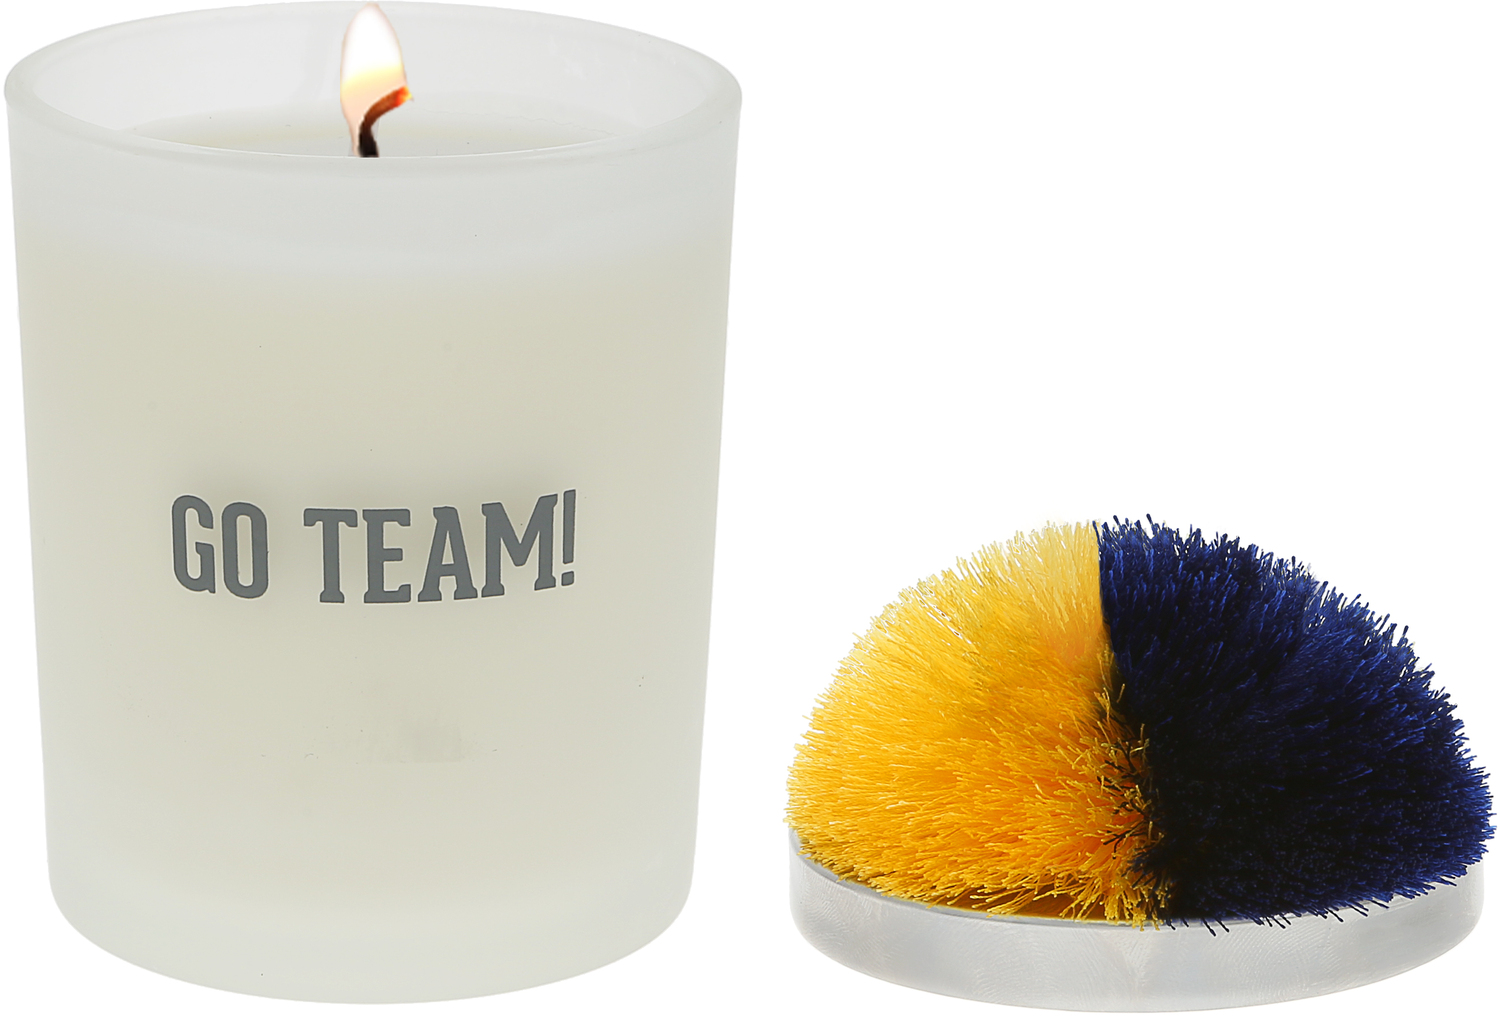 Go Team! - Blue & Yellow by Repre-Scent - Go Team! - Blue & Yellow - 5.5 oz - 100% Soy Wax Candle with Pom Pom Lid
Scent: Tranquility